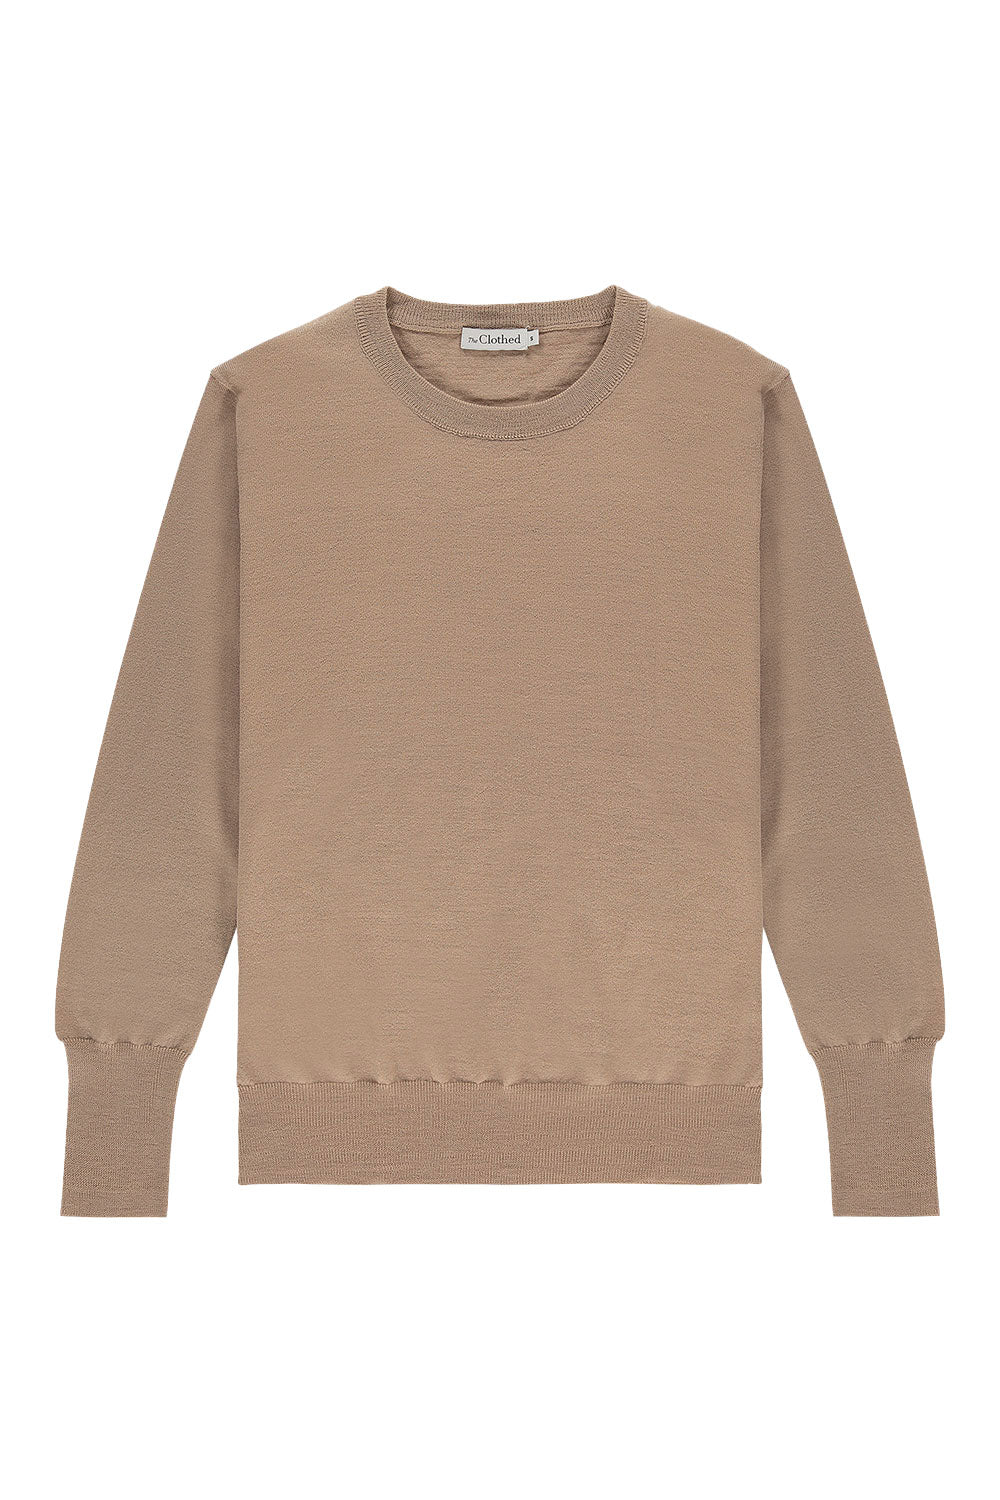 The Clothed Barcelona Merino Pull Sand